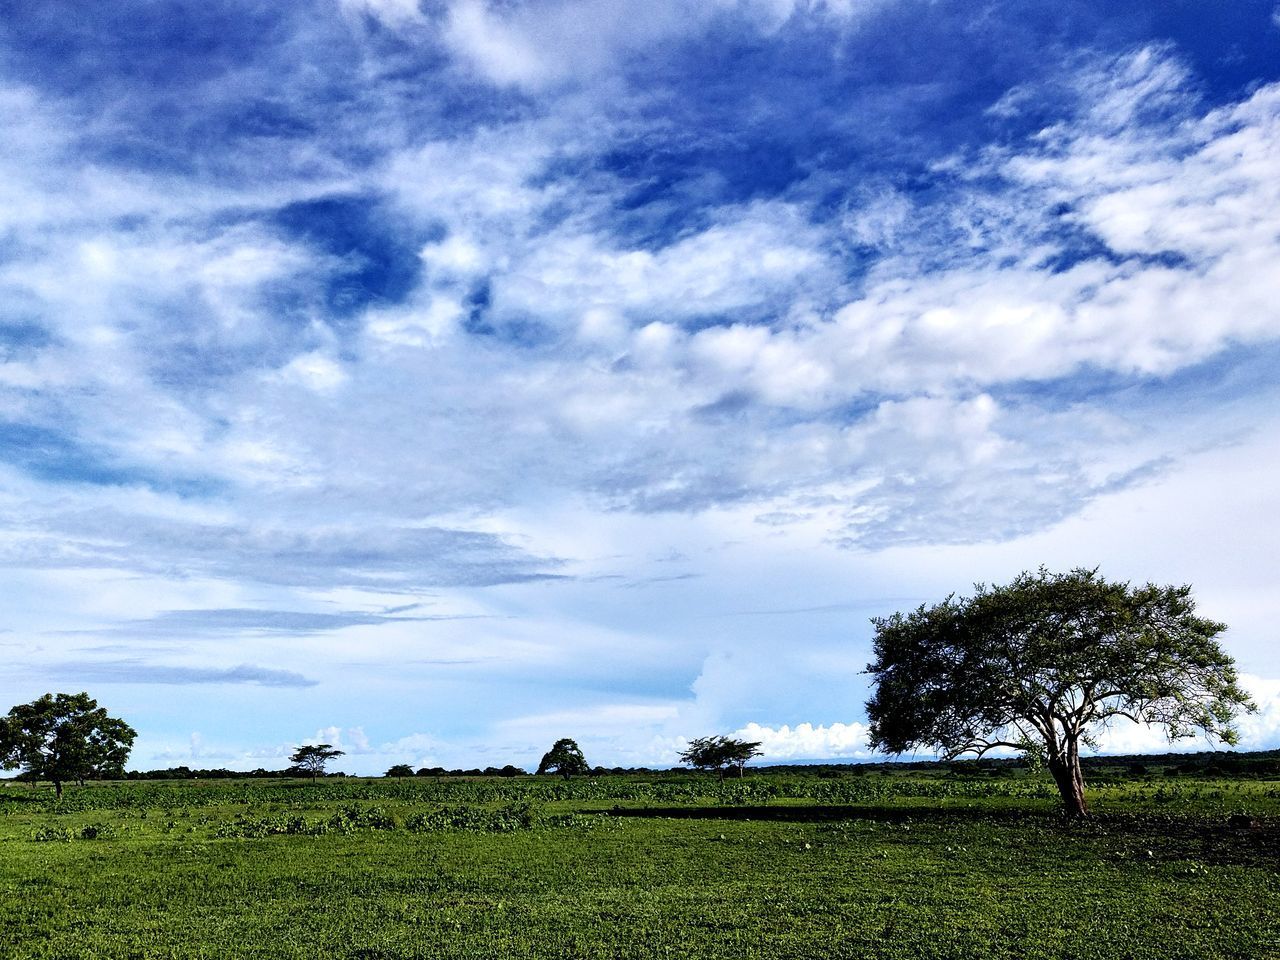 SCENIC VIEW OF LAND AGAINST SKY